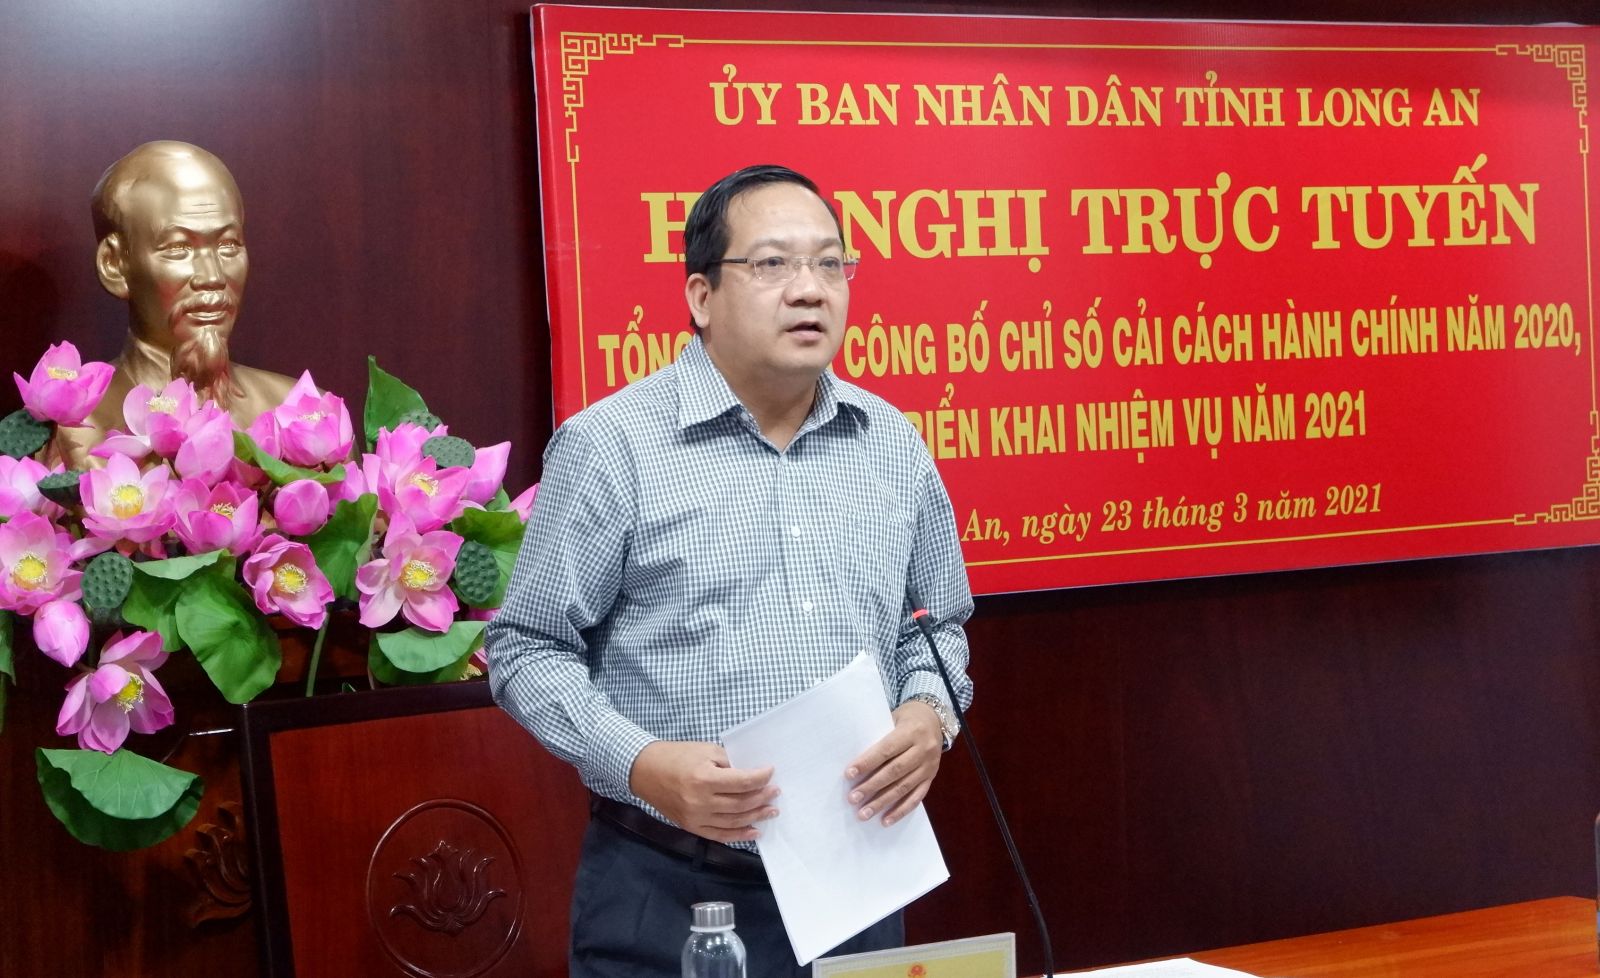 Vice Chairman of the Provincial People's Committee - Nguyen Minh Lam speaks and directs the conference